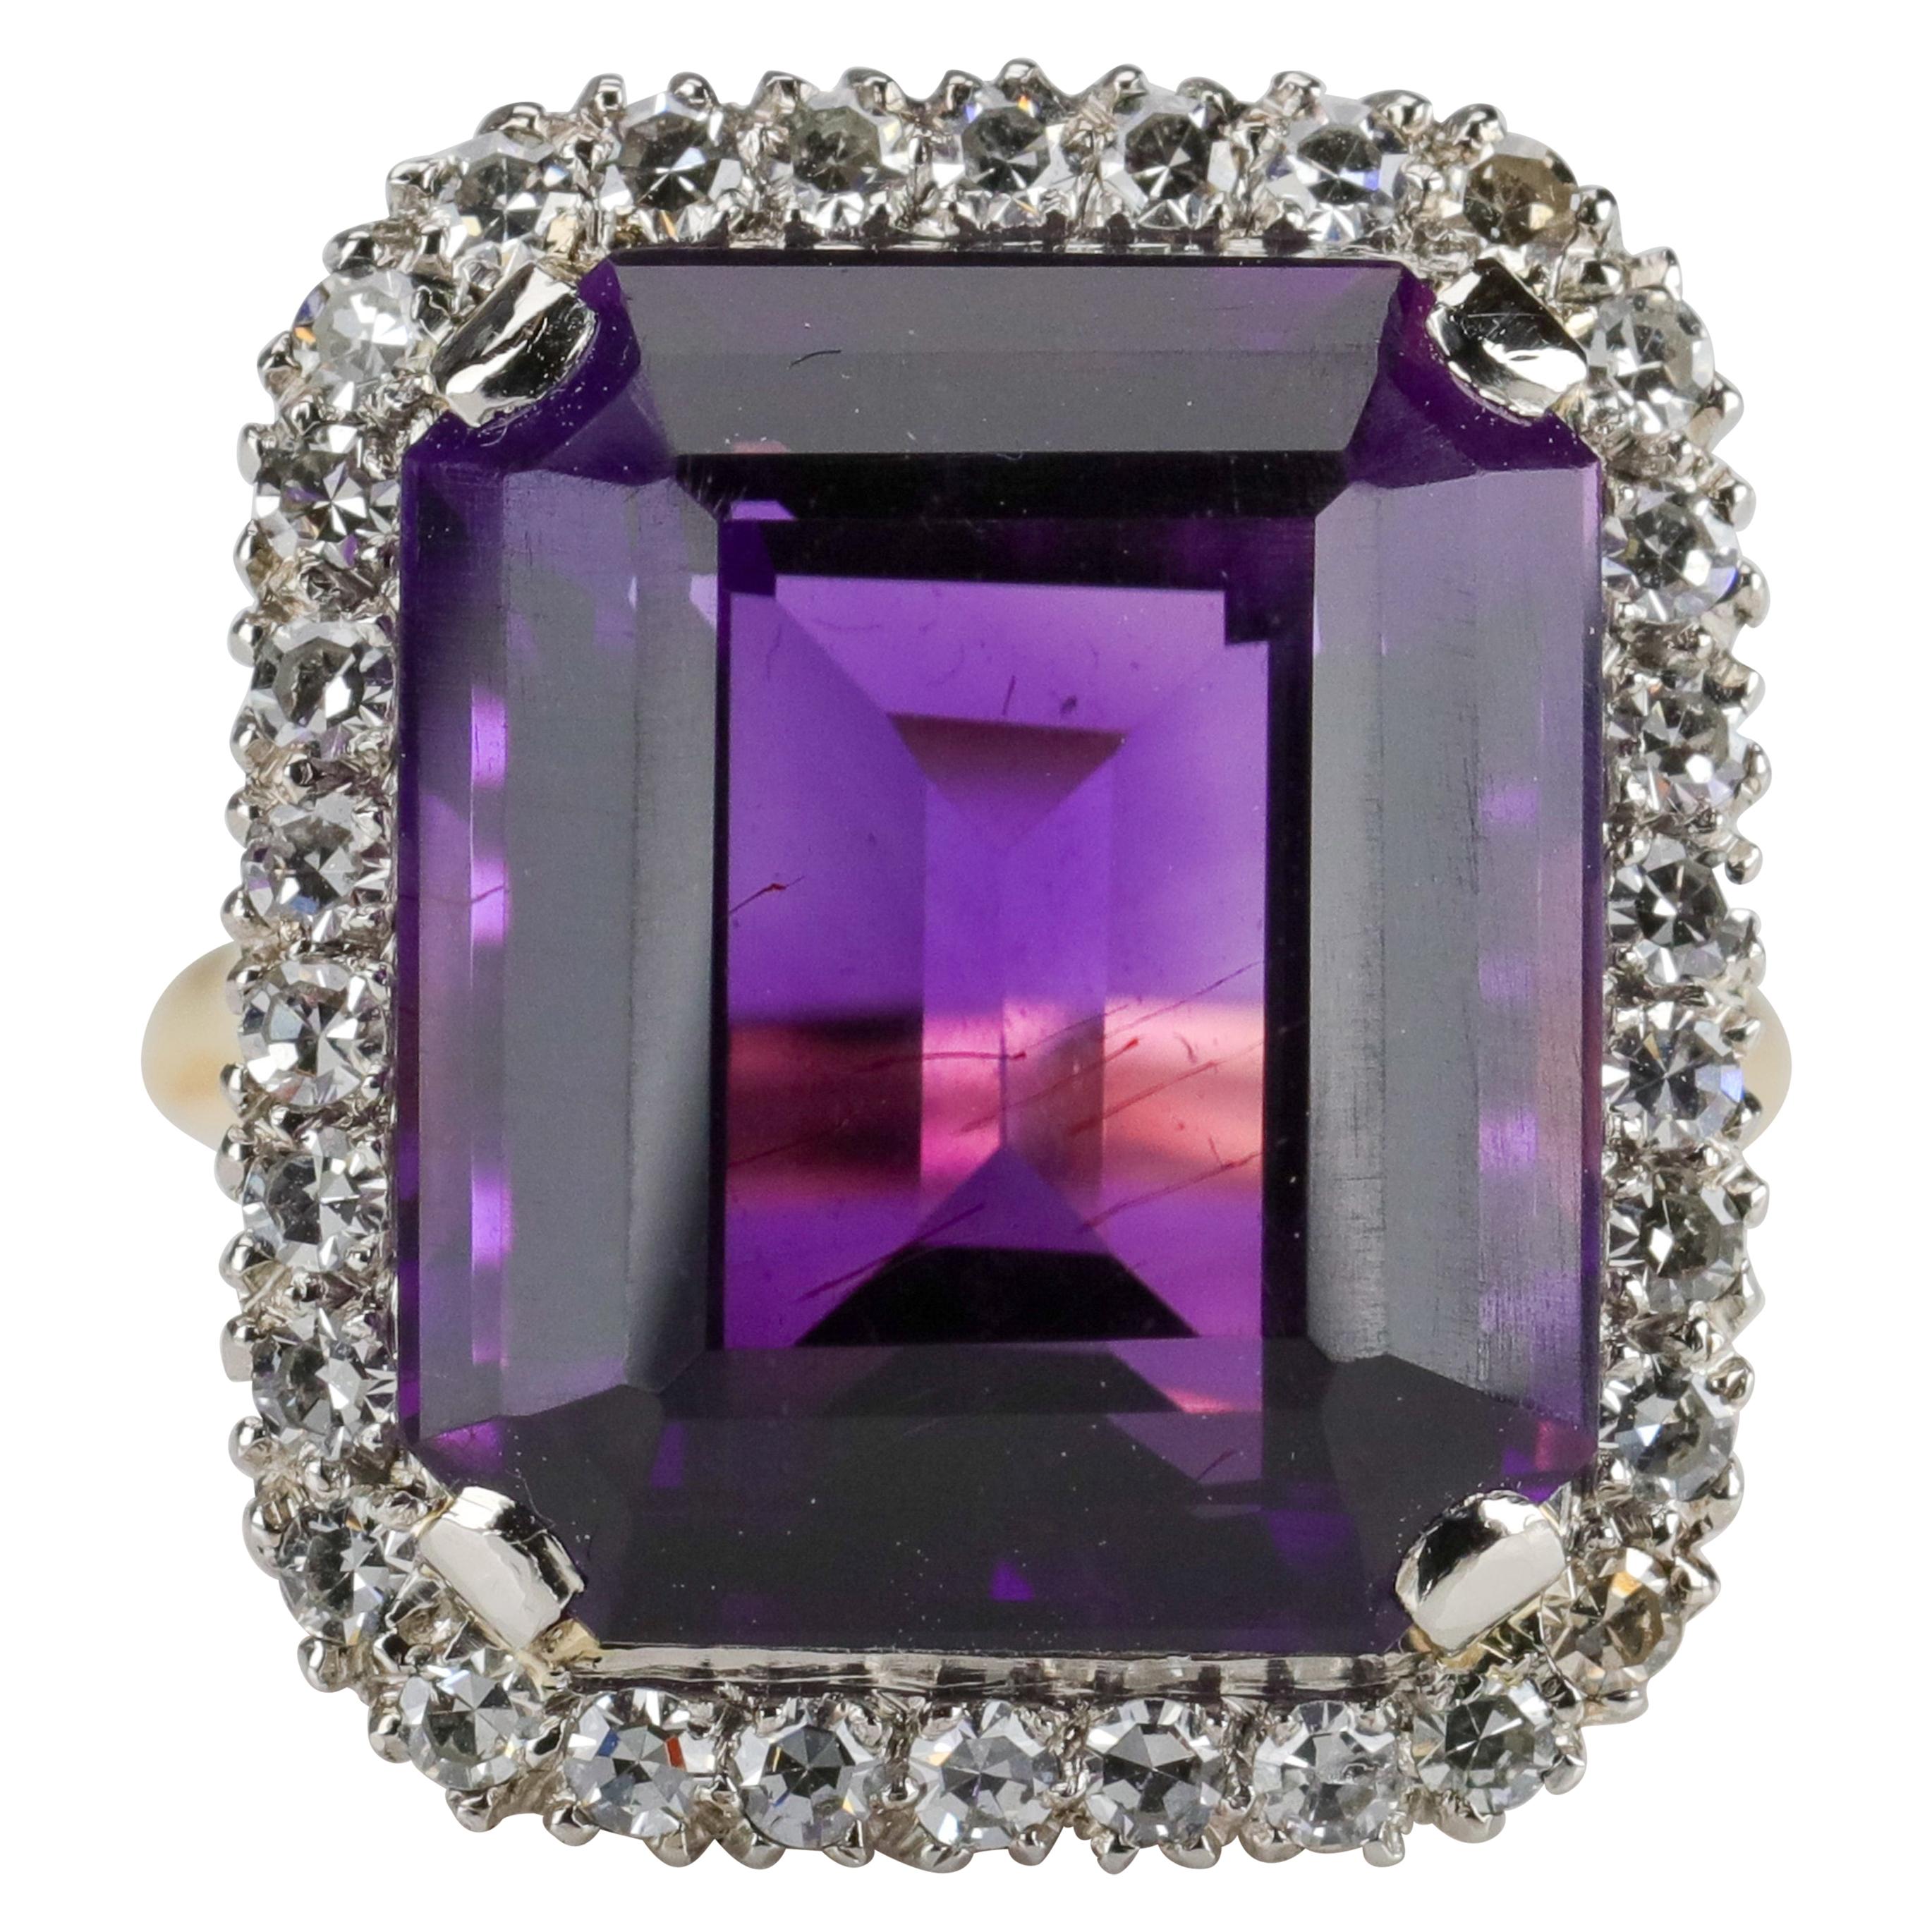 Amethyst Ring by British Royal Jeweler in Original Box with Receipt